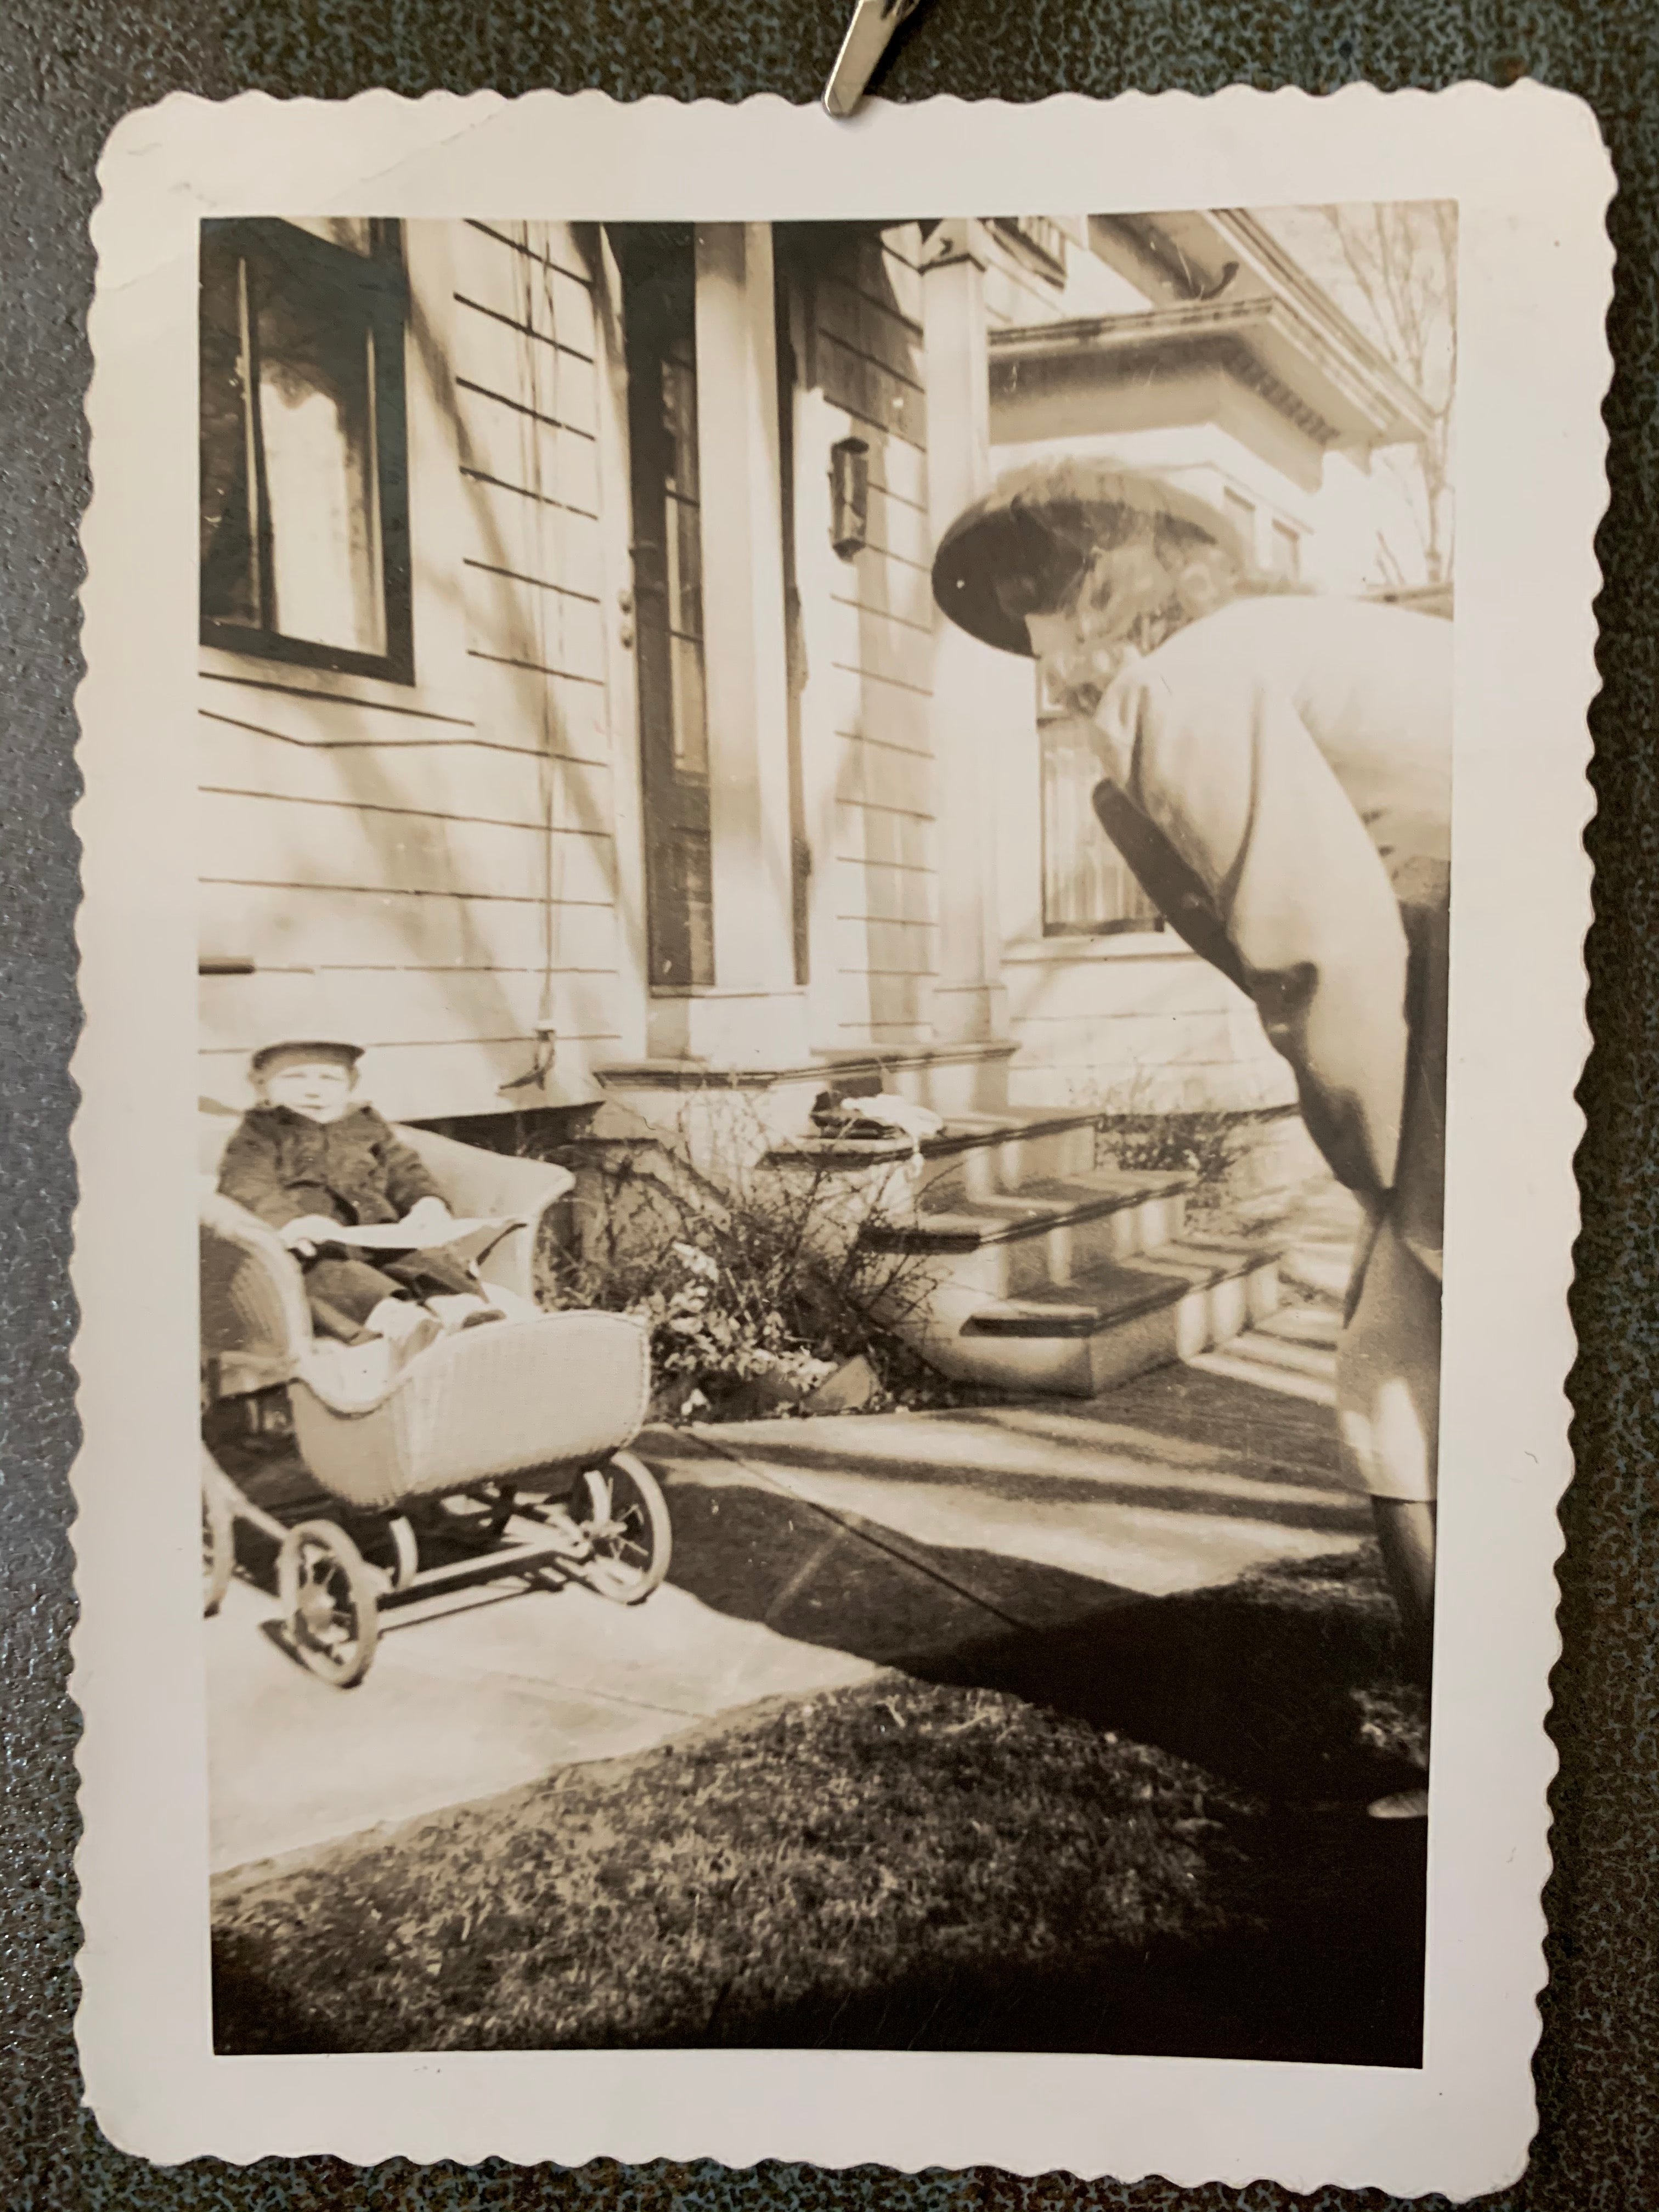 Vintage Black & White Photograph of Woman & Baby in Carriage; "Peter Pan Print 1947"